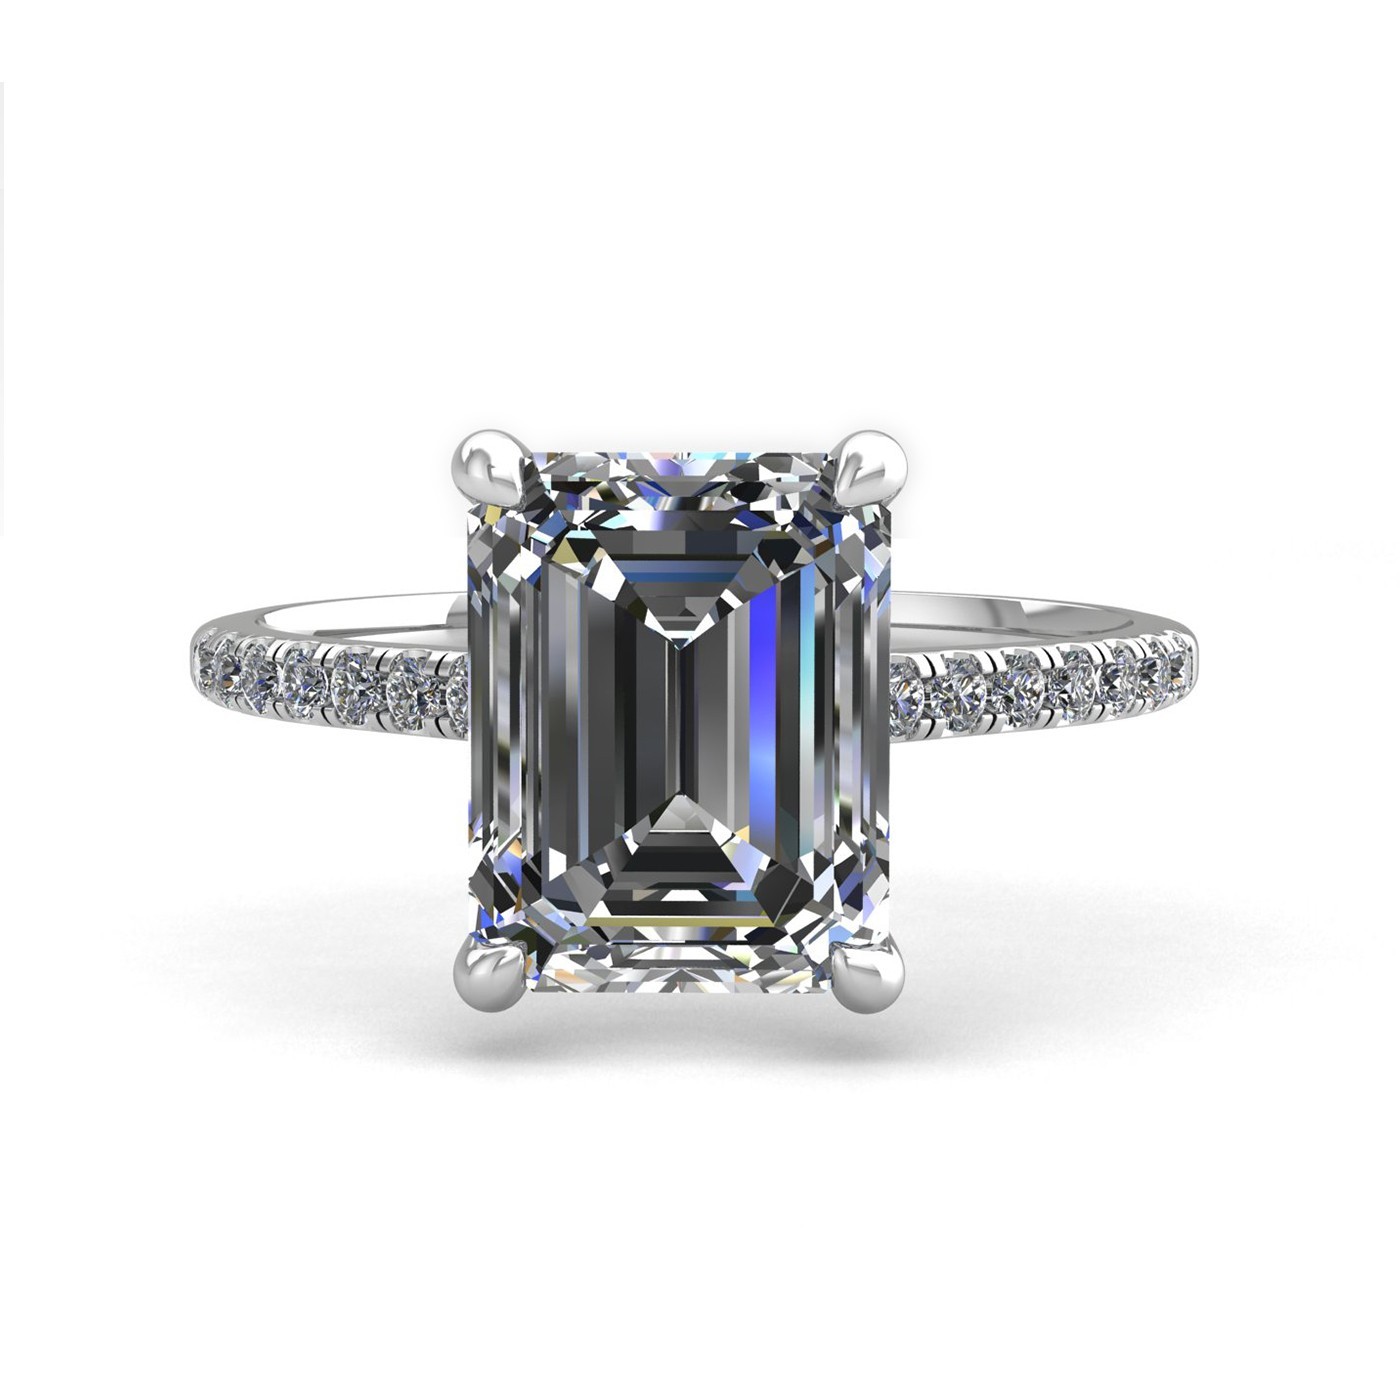 18k white gold 1.5ct 4 prongs emerald cut diamond engagement ring with whisper thin pavÉ set band Photos & images